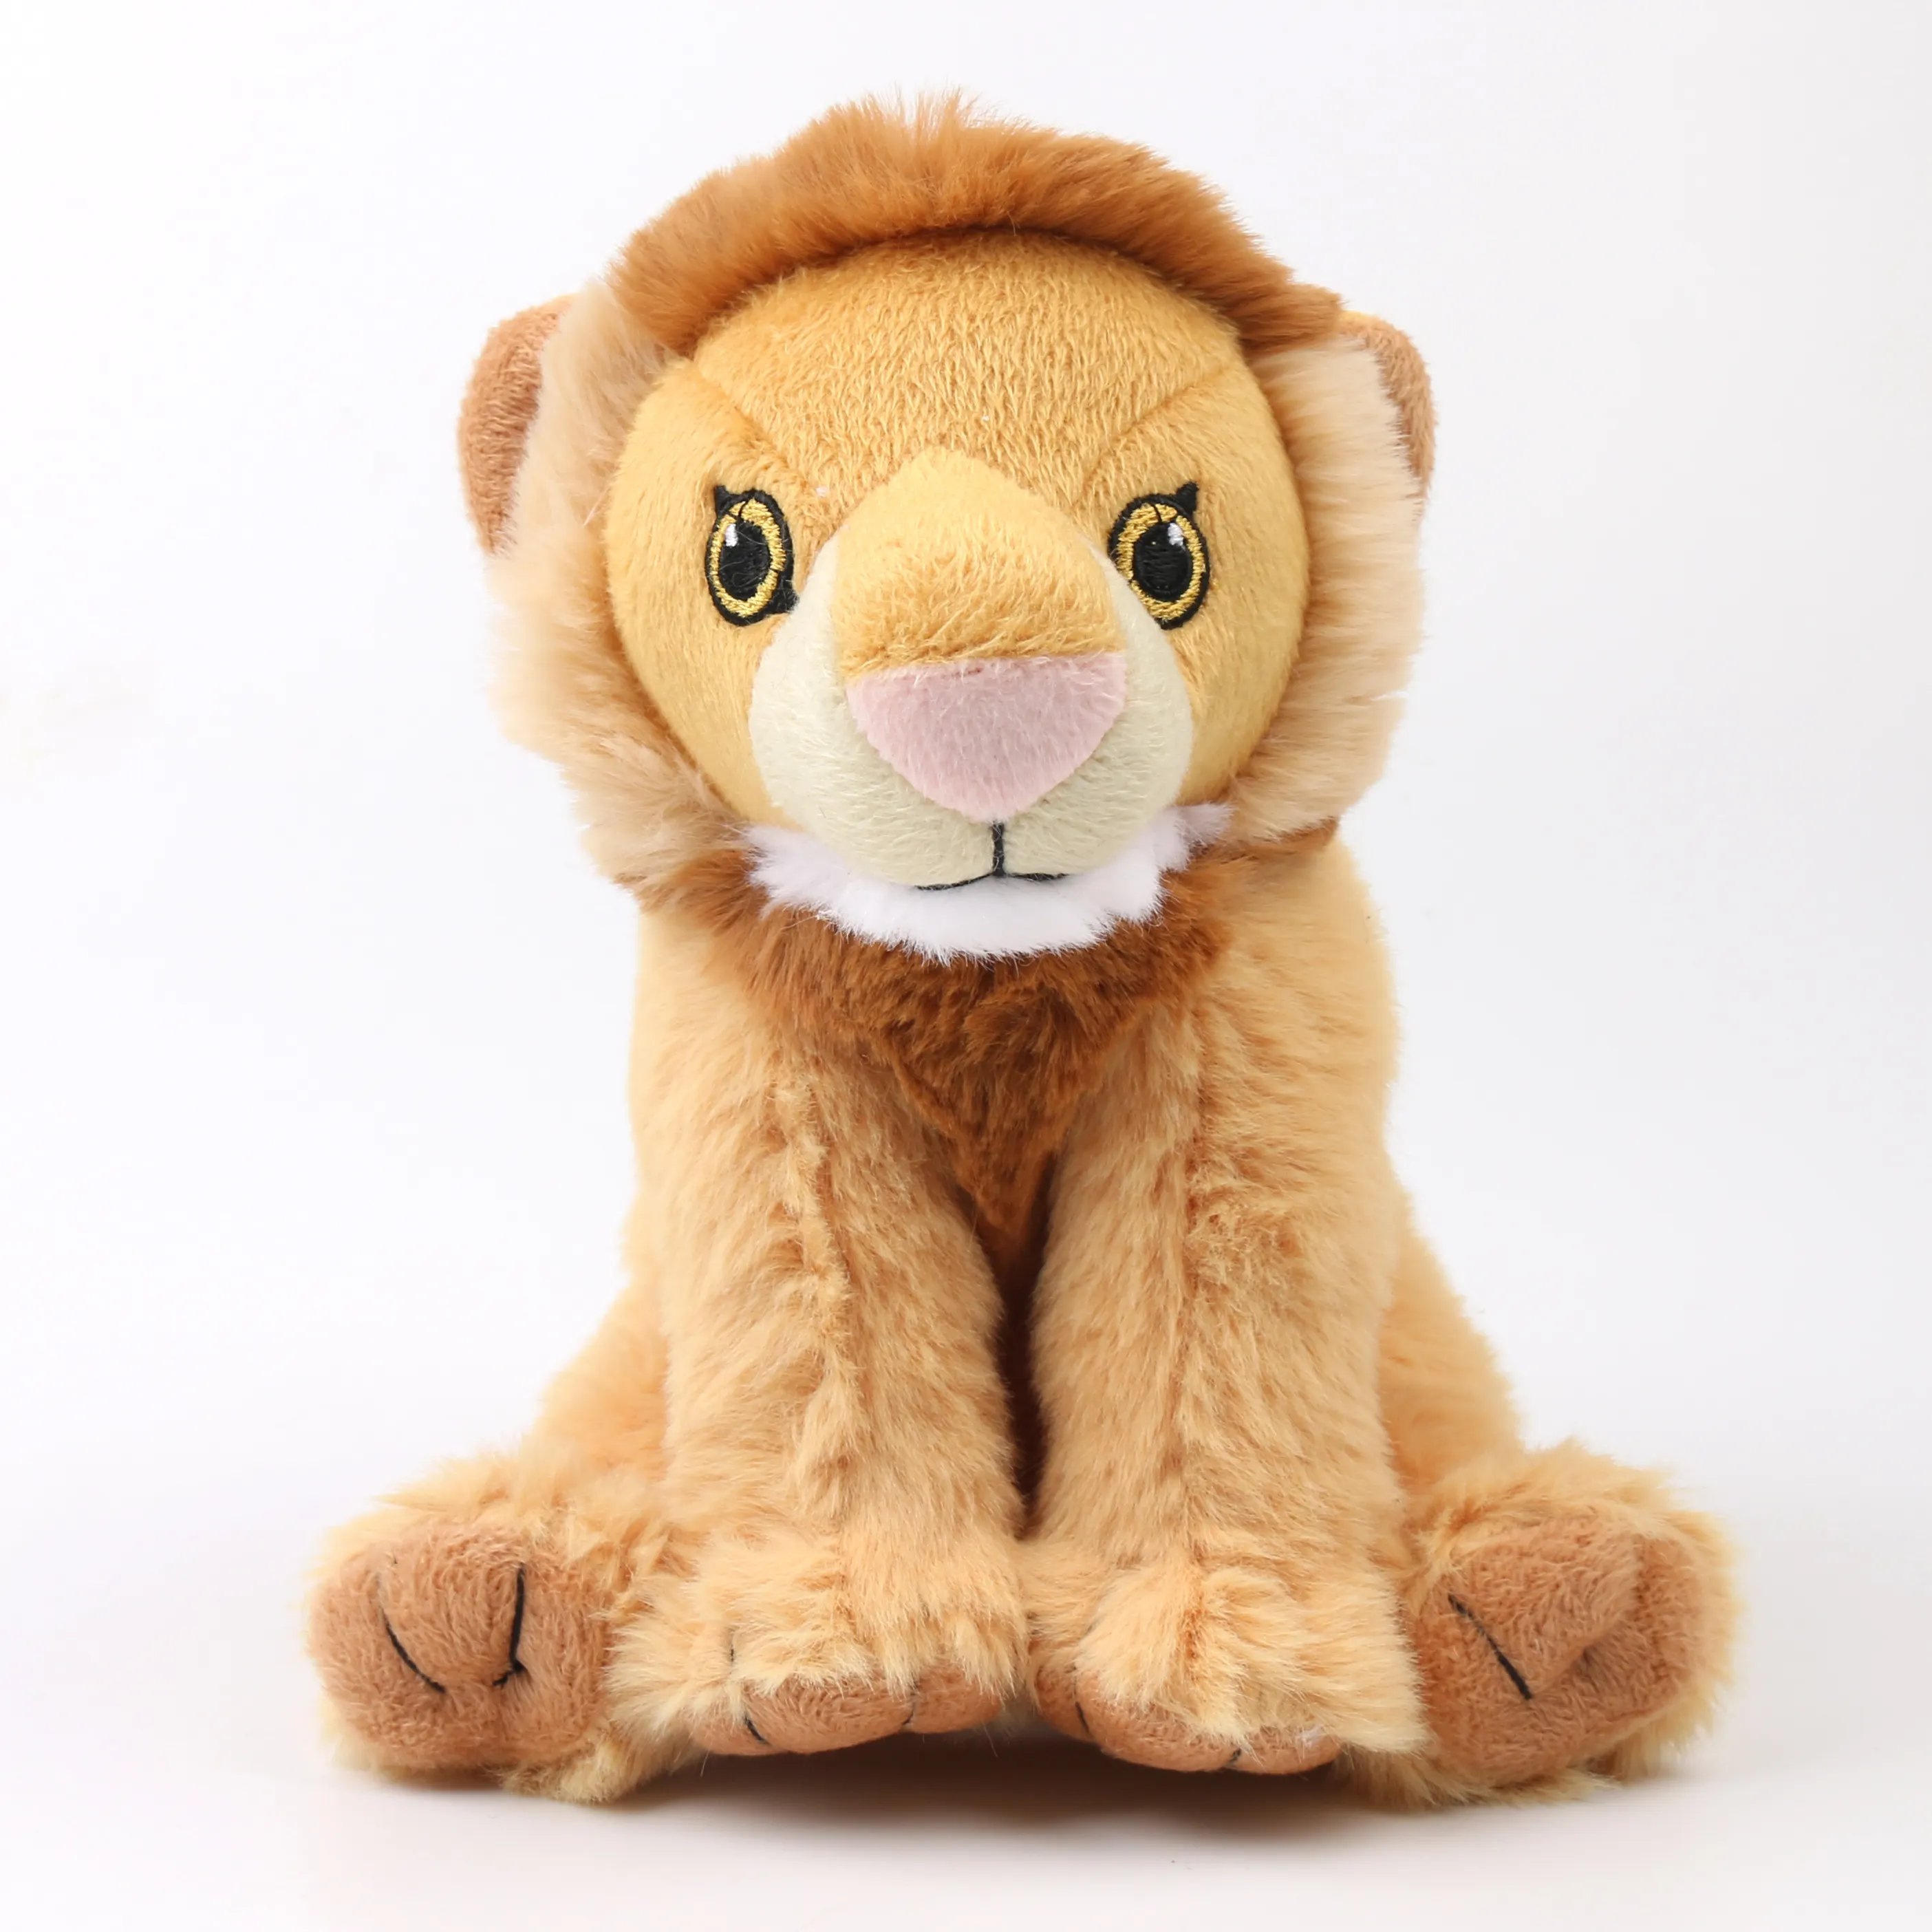 GRS Certified Plush Lion Toy Made Of 100% Recycled Material